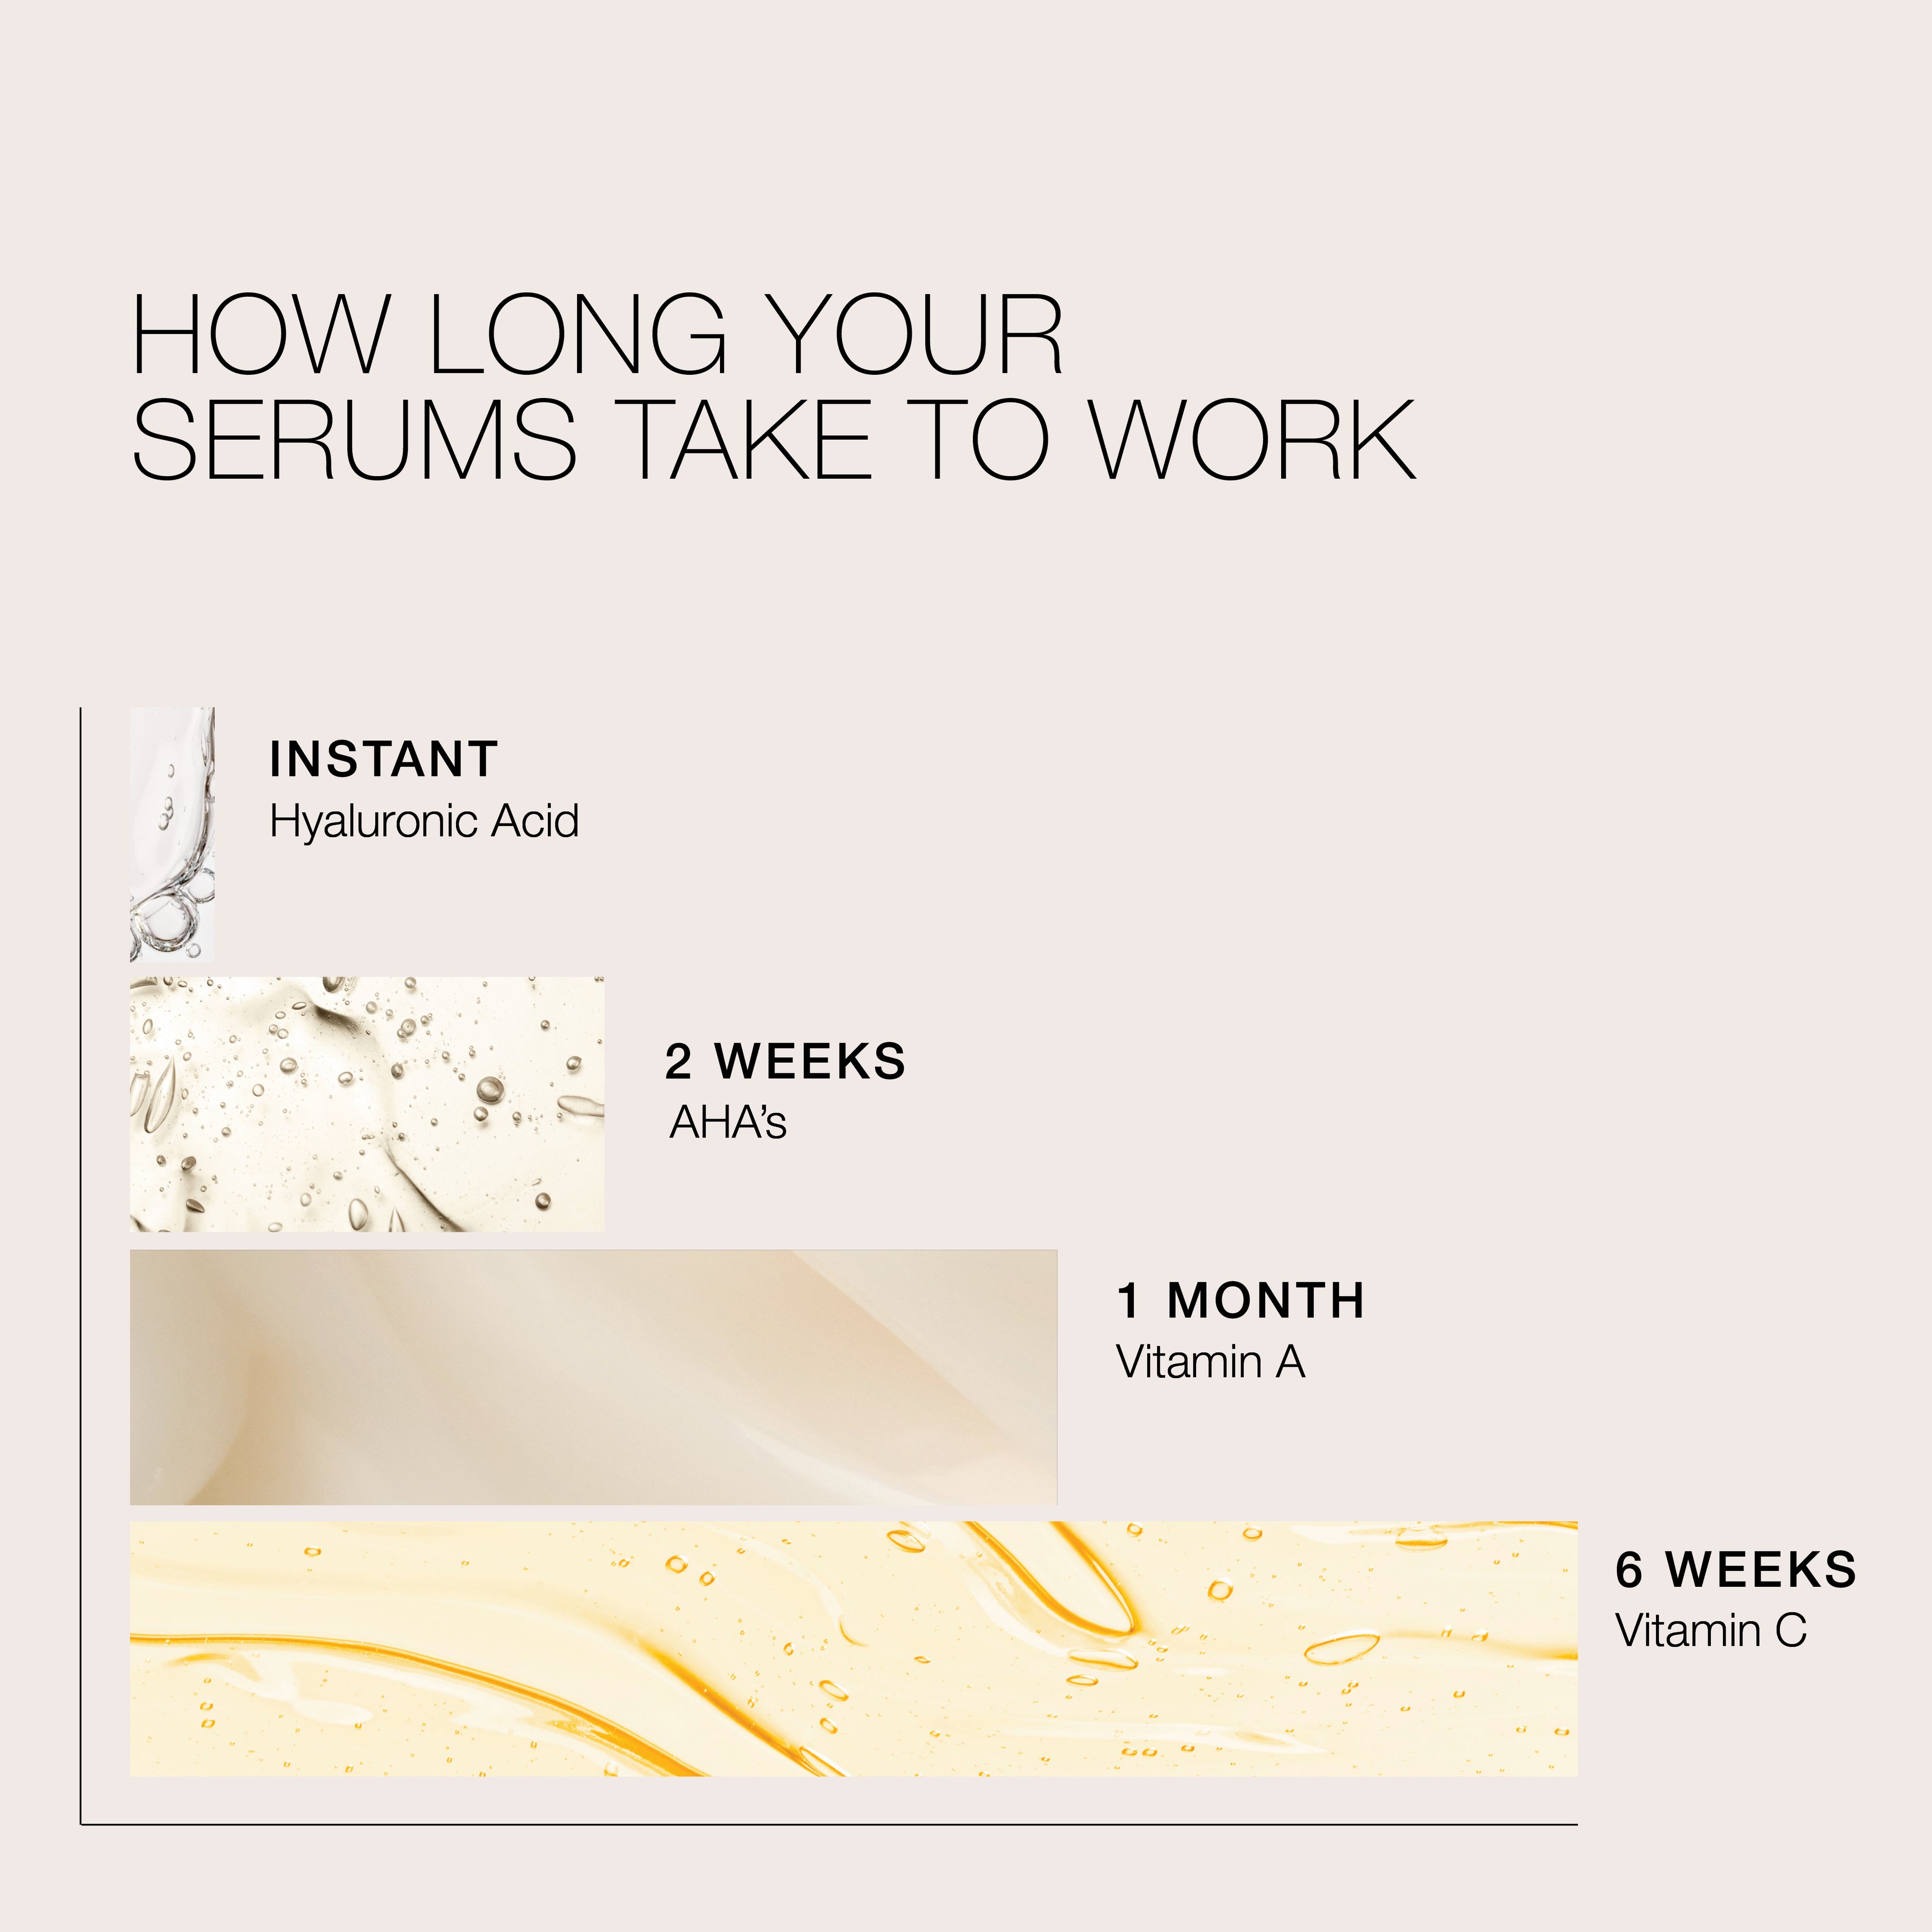 How long your serum takes to work